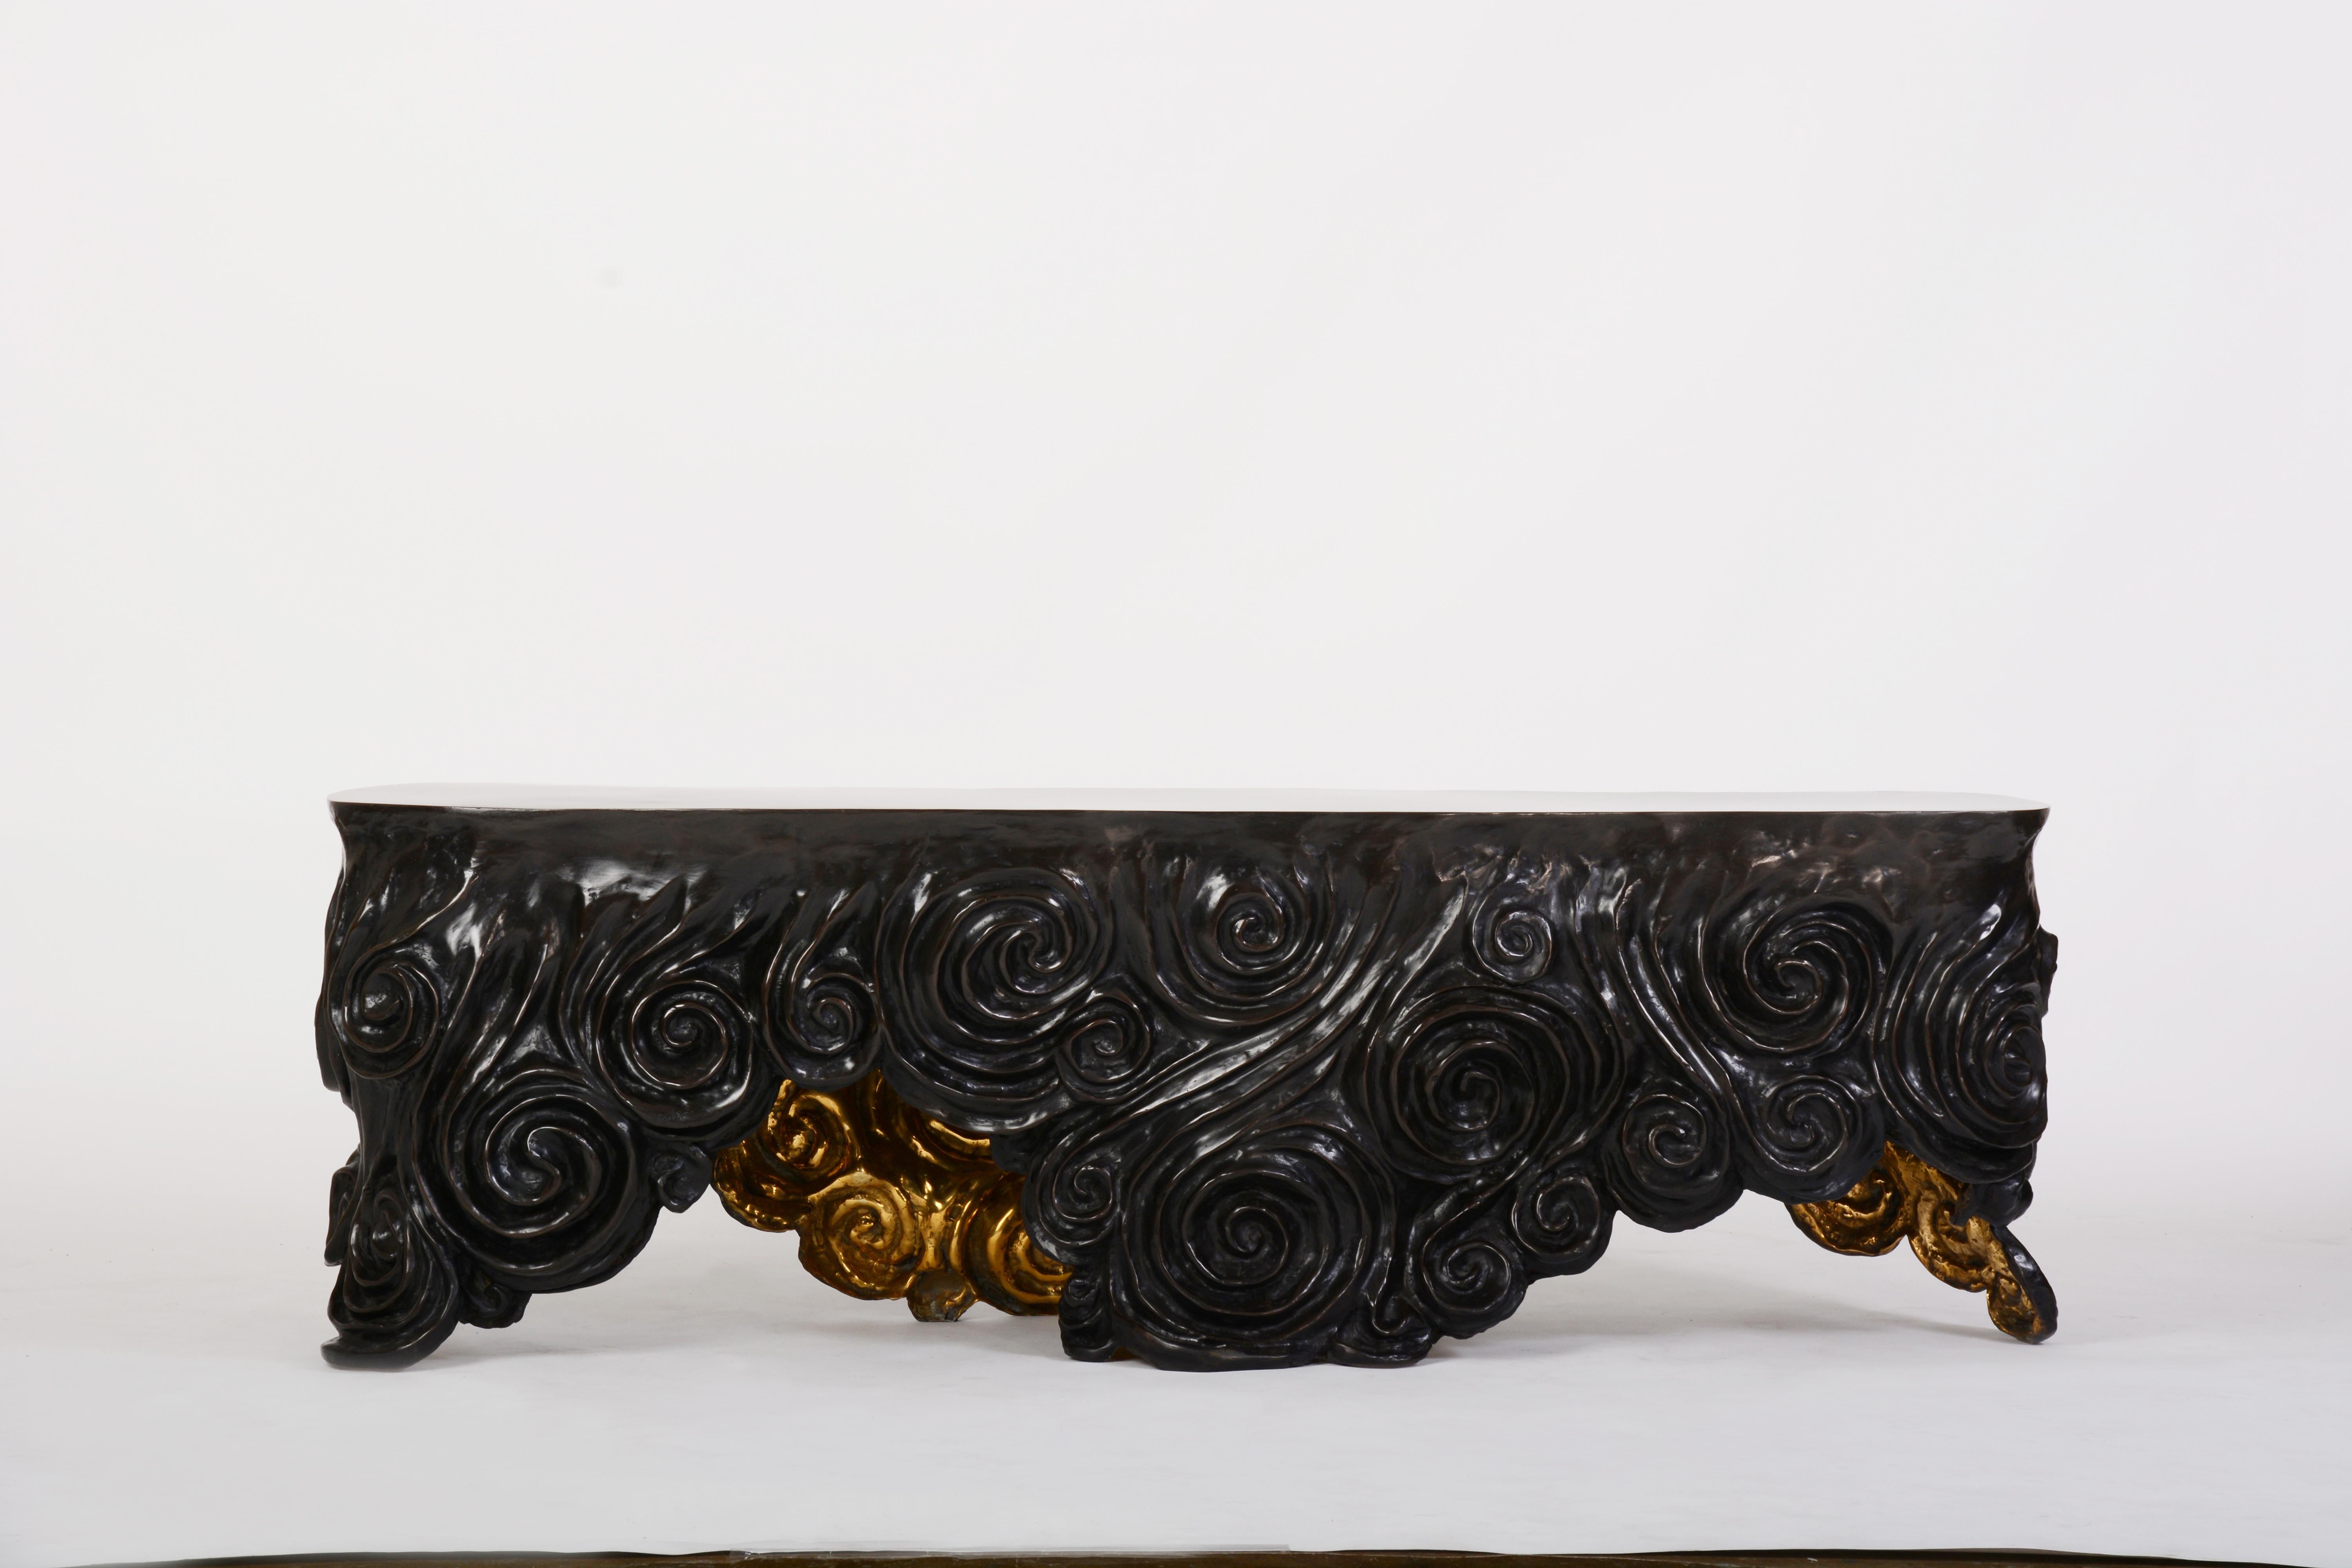 Morgan Bench in Cast Bronze from Elan Atelier

The Morgan bench is cast using the lost wax method in solid bronze with the Chinese Cloud pattern. The exterior finish is antique bronze and the interior finish is polished gold bronze. Bespoke sizes